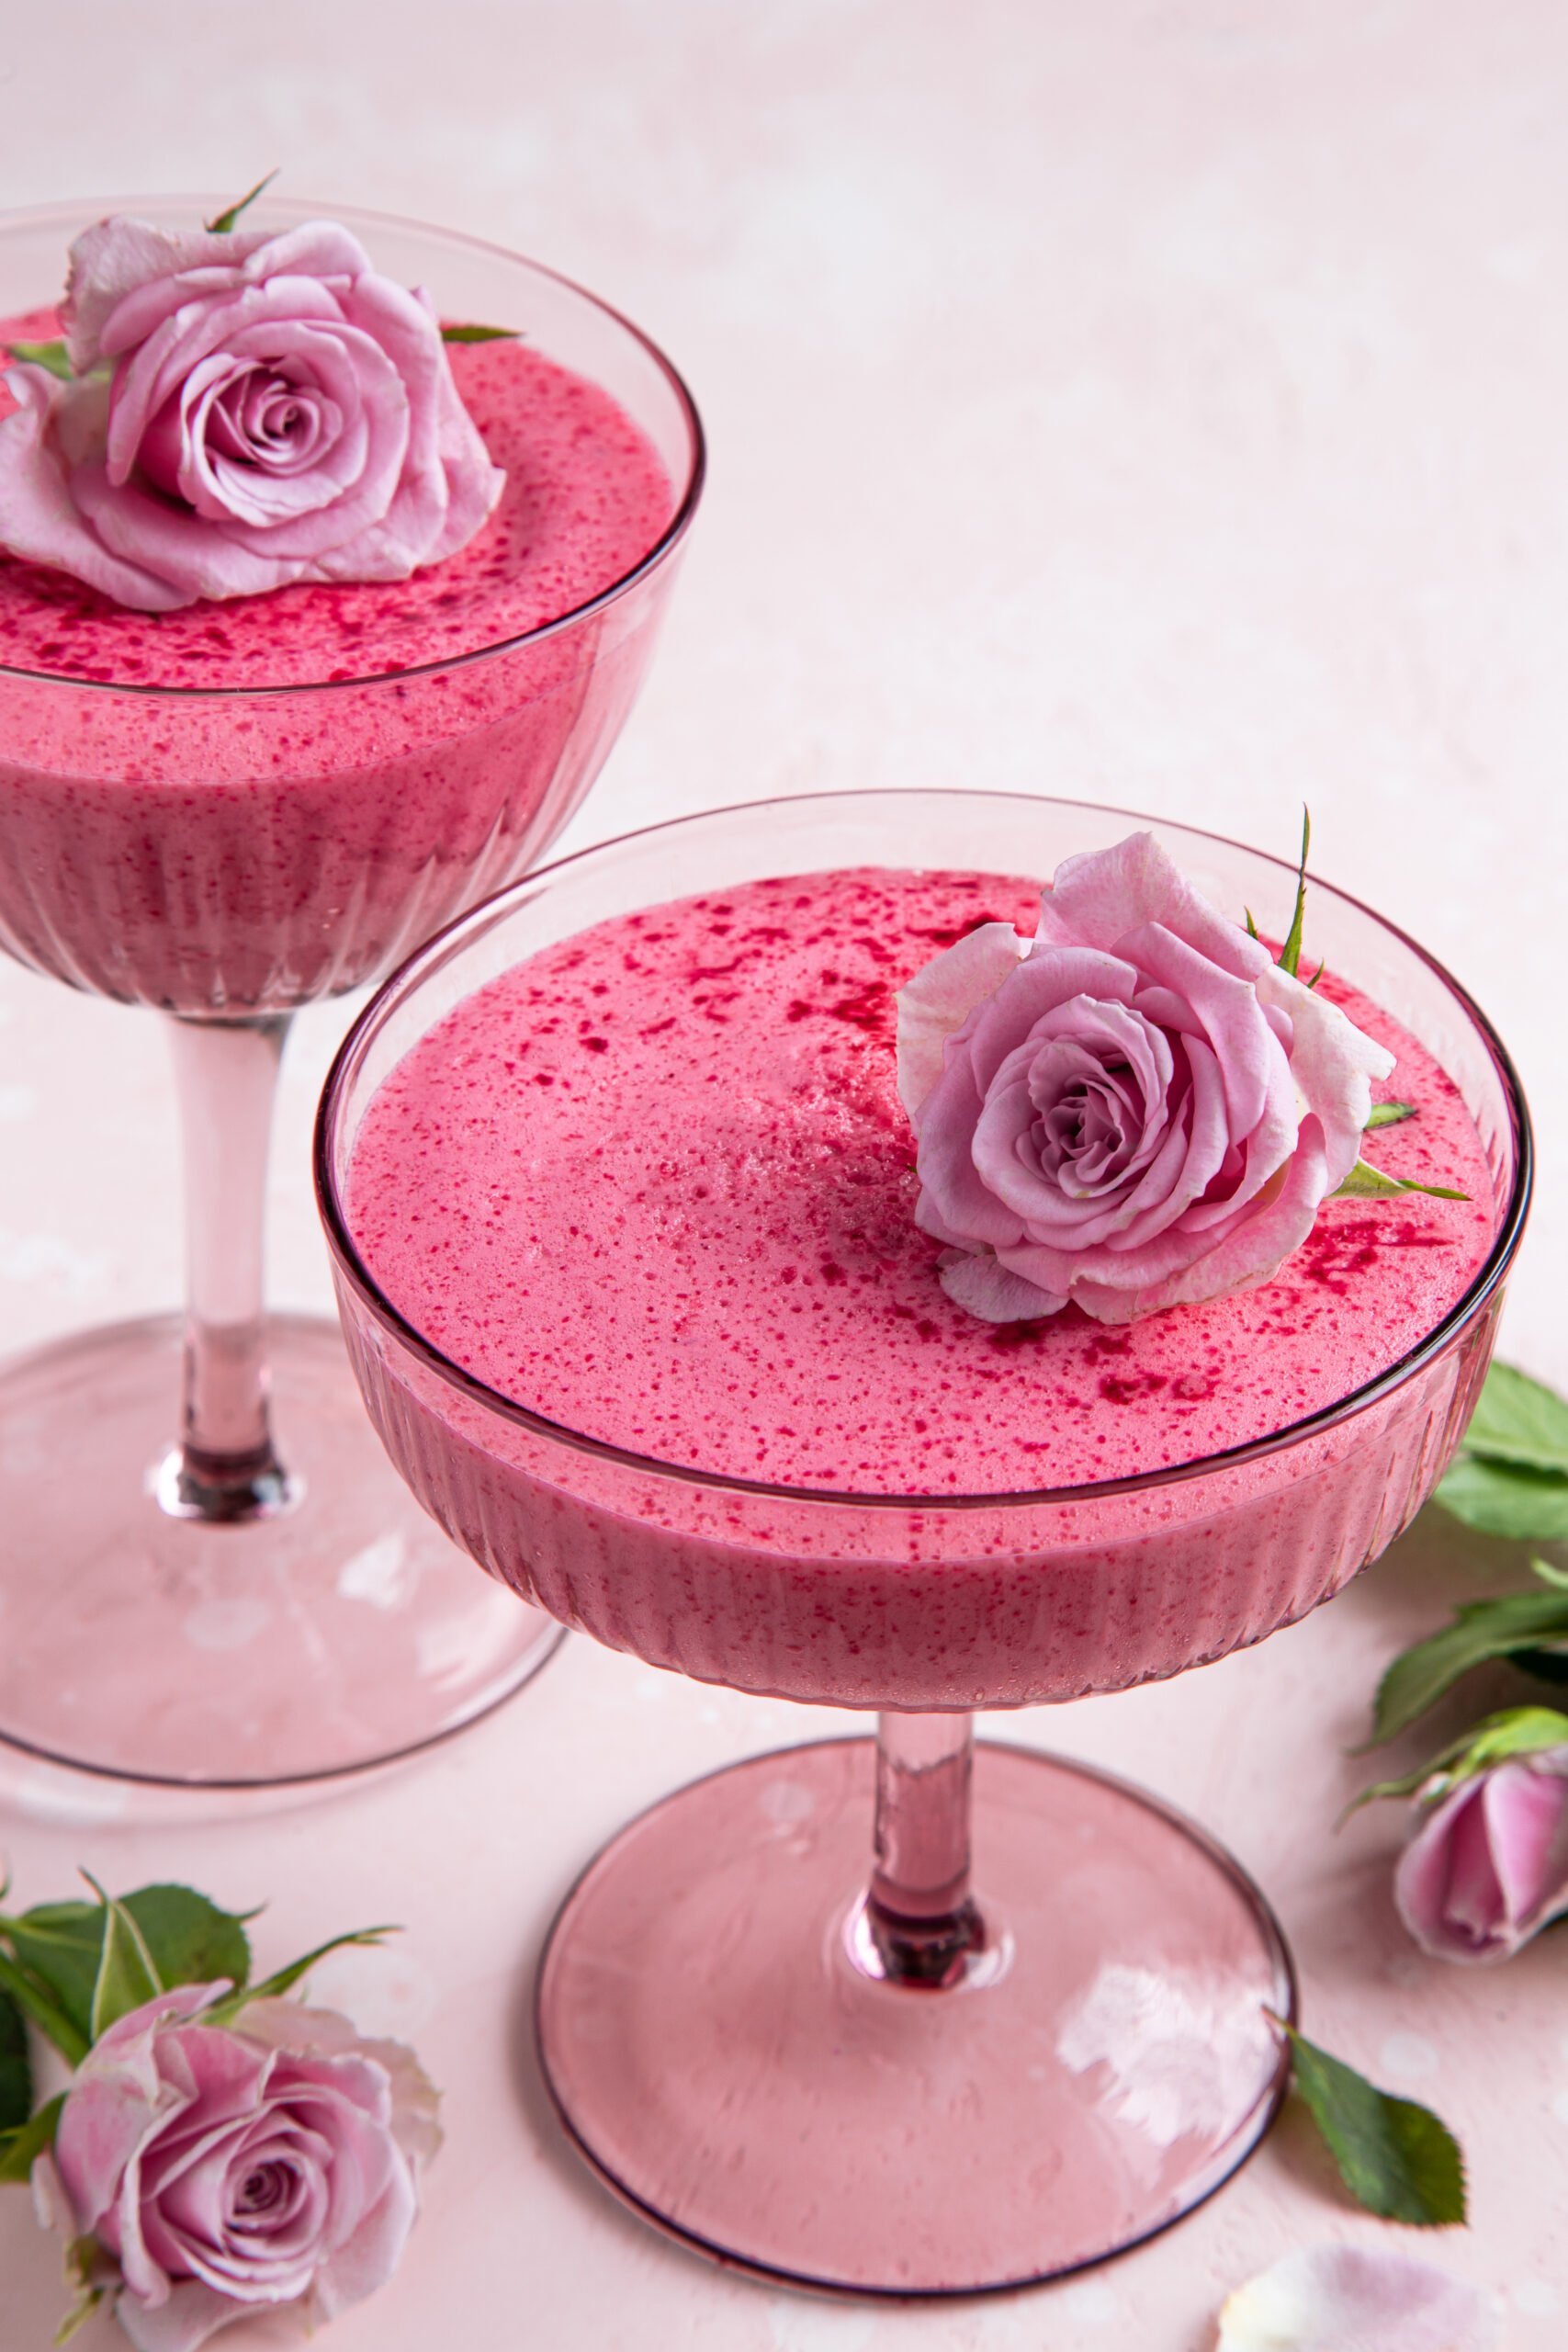 Pink Berry Mousse Recipe; an easy pink dessert recipe that is fluffy and melts in your mouth! Perfect for Valentine's day! {delicious berry mousse in glass, festive dessert for Valentines day, pink background, selective focus}